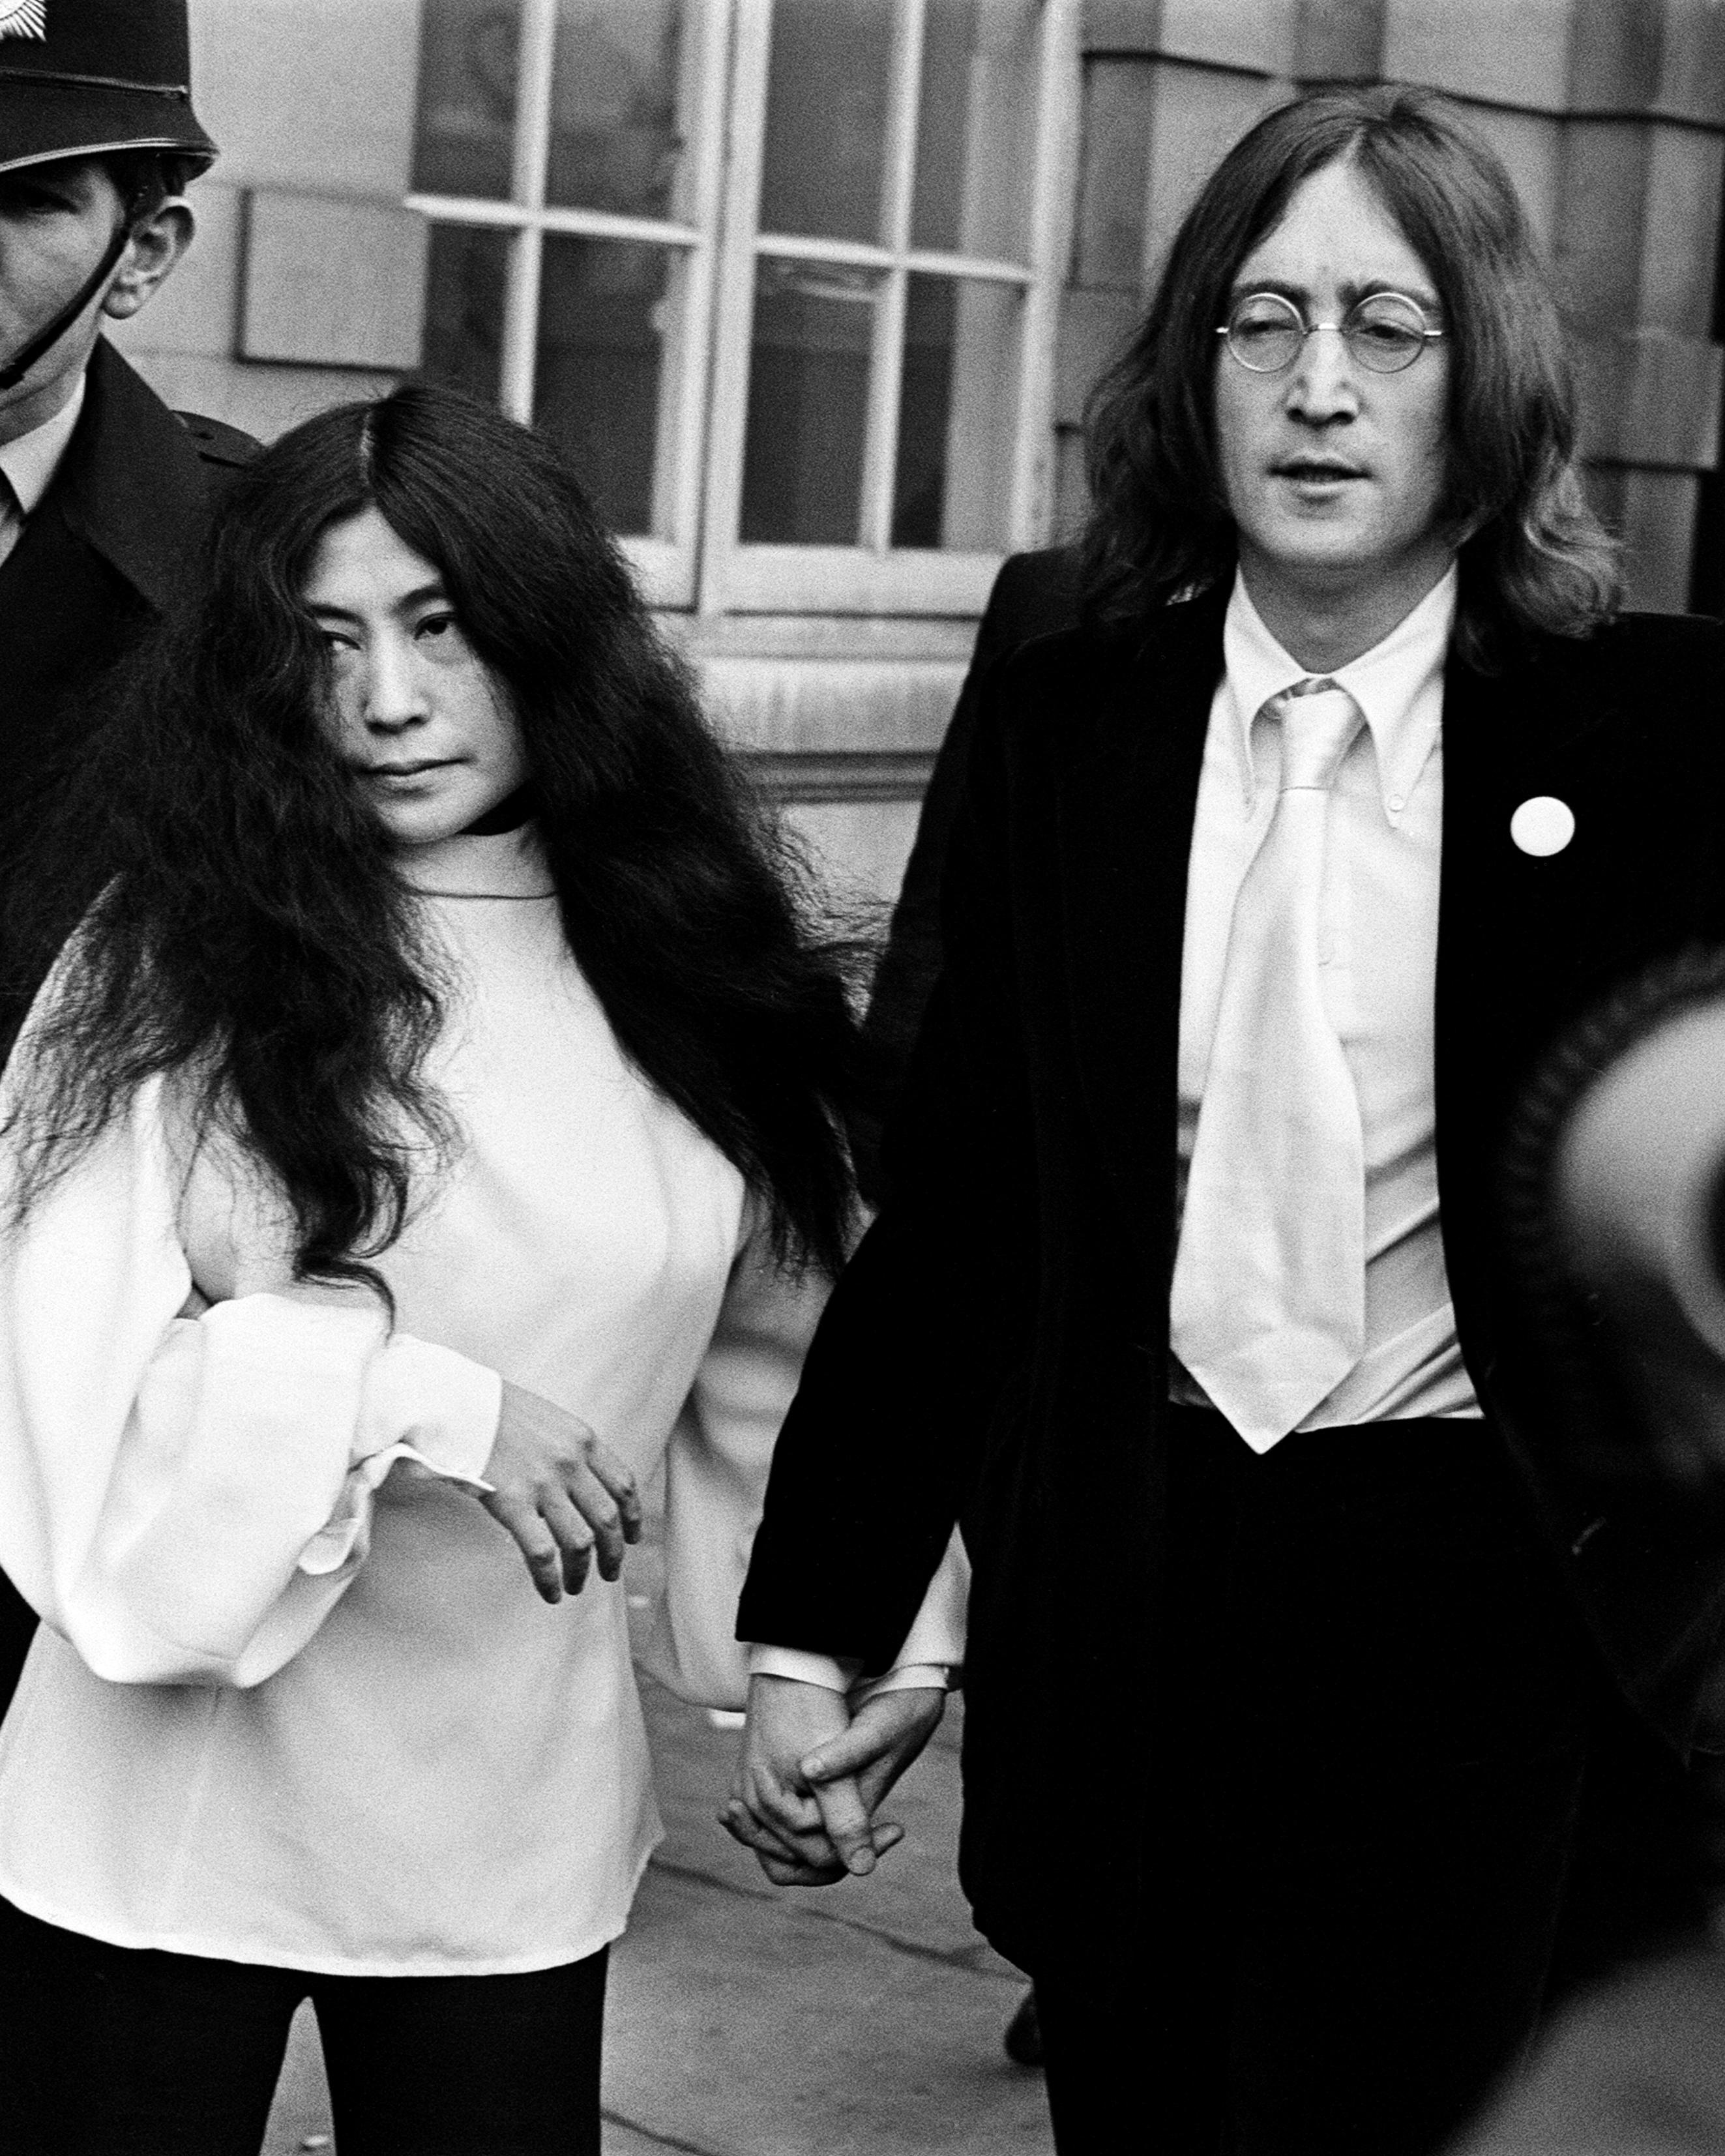 Polden with John Lennon and Yoko Ono after he had admitted cannabis possession in court in 1968